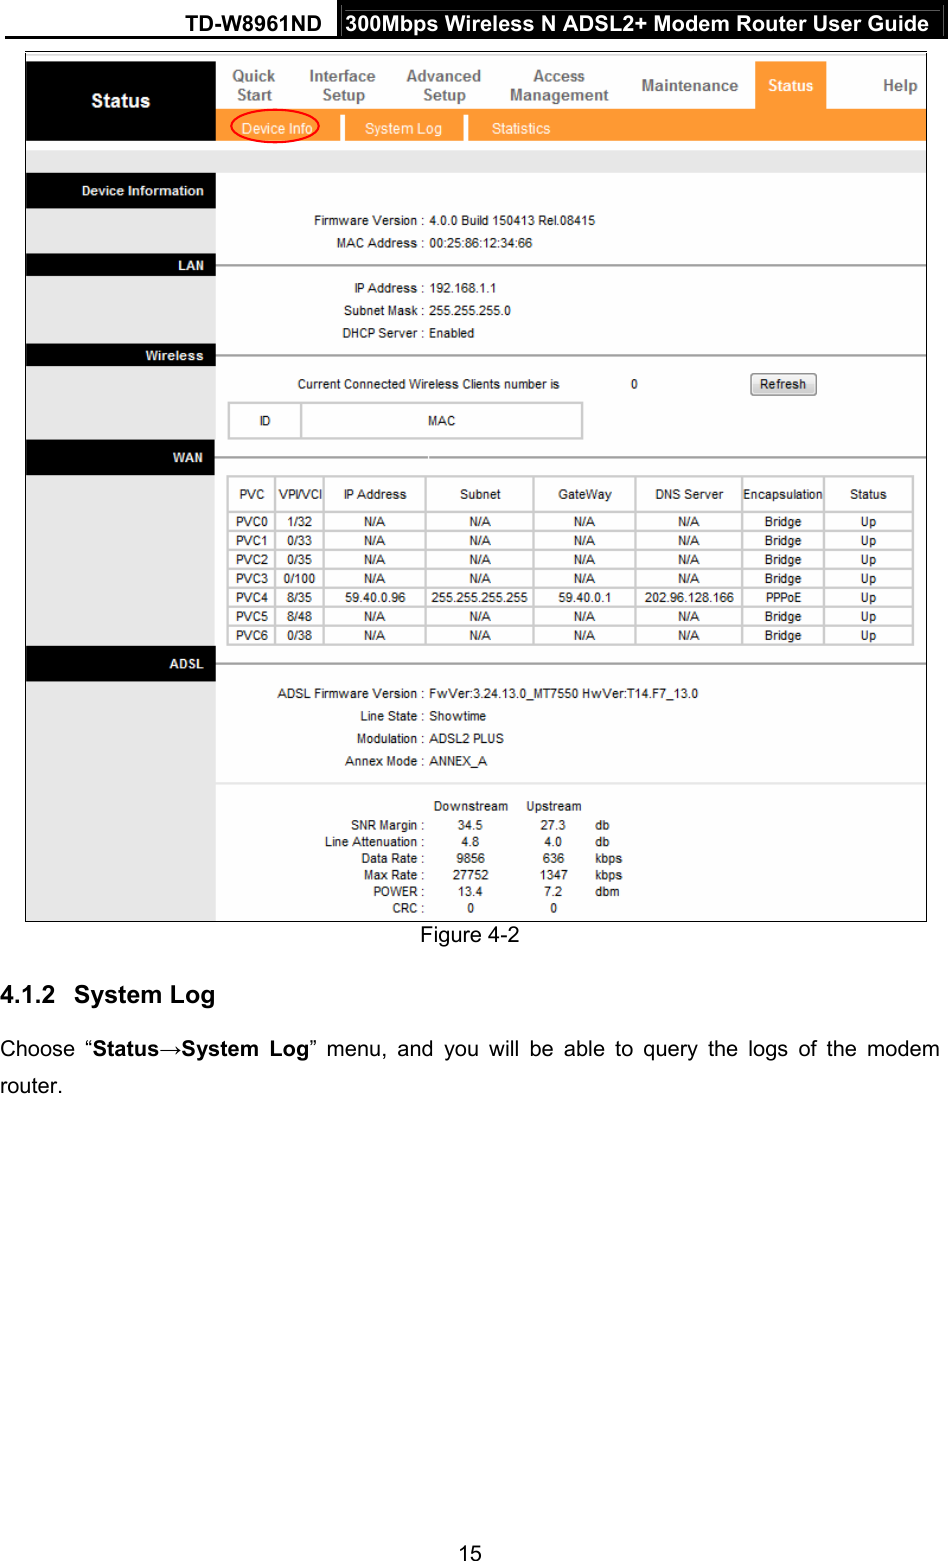 TD-W8961ND  300Mbps Wireless N ADSL2+ Modem Router User Guide  15   Figure 4-2 4.1.2  System Log Choose “Status→System Log” menu, and you will be able to query the logs of the modem router. 